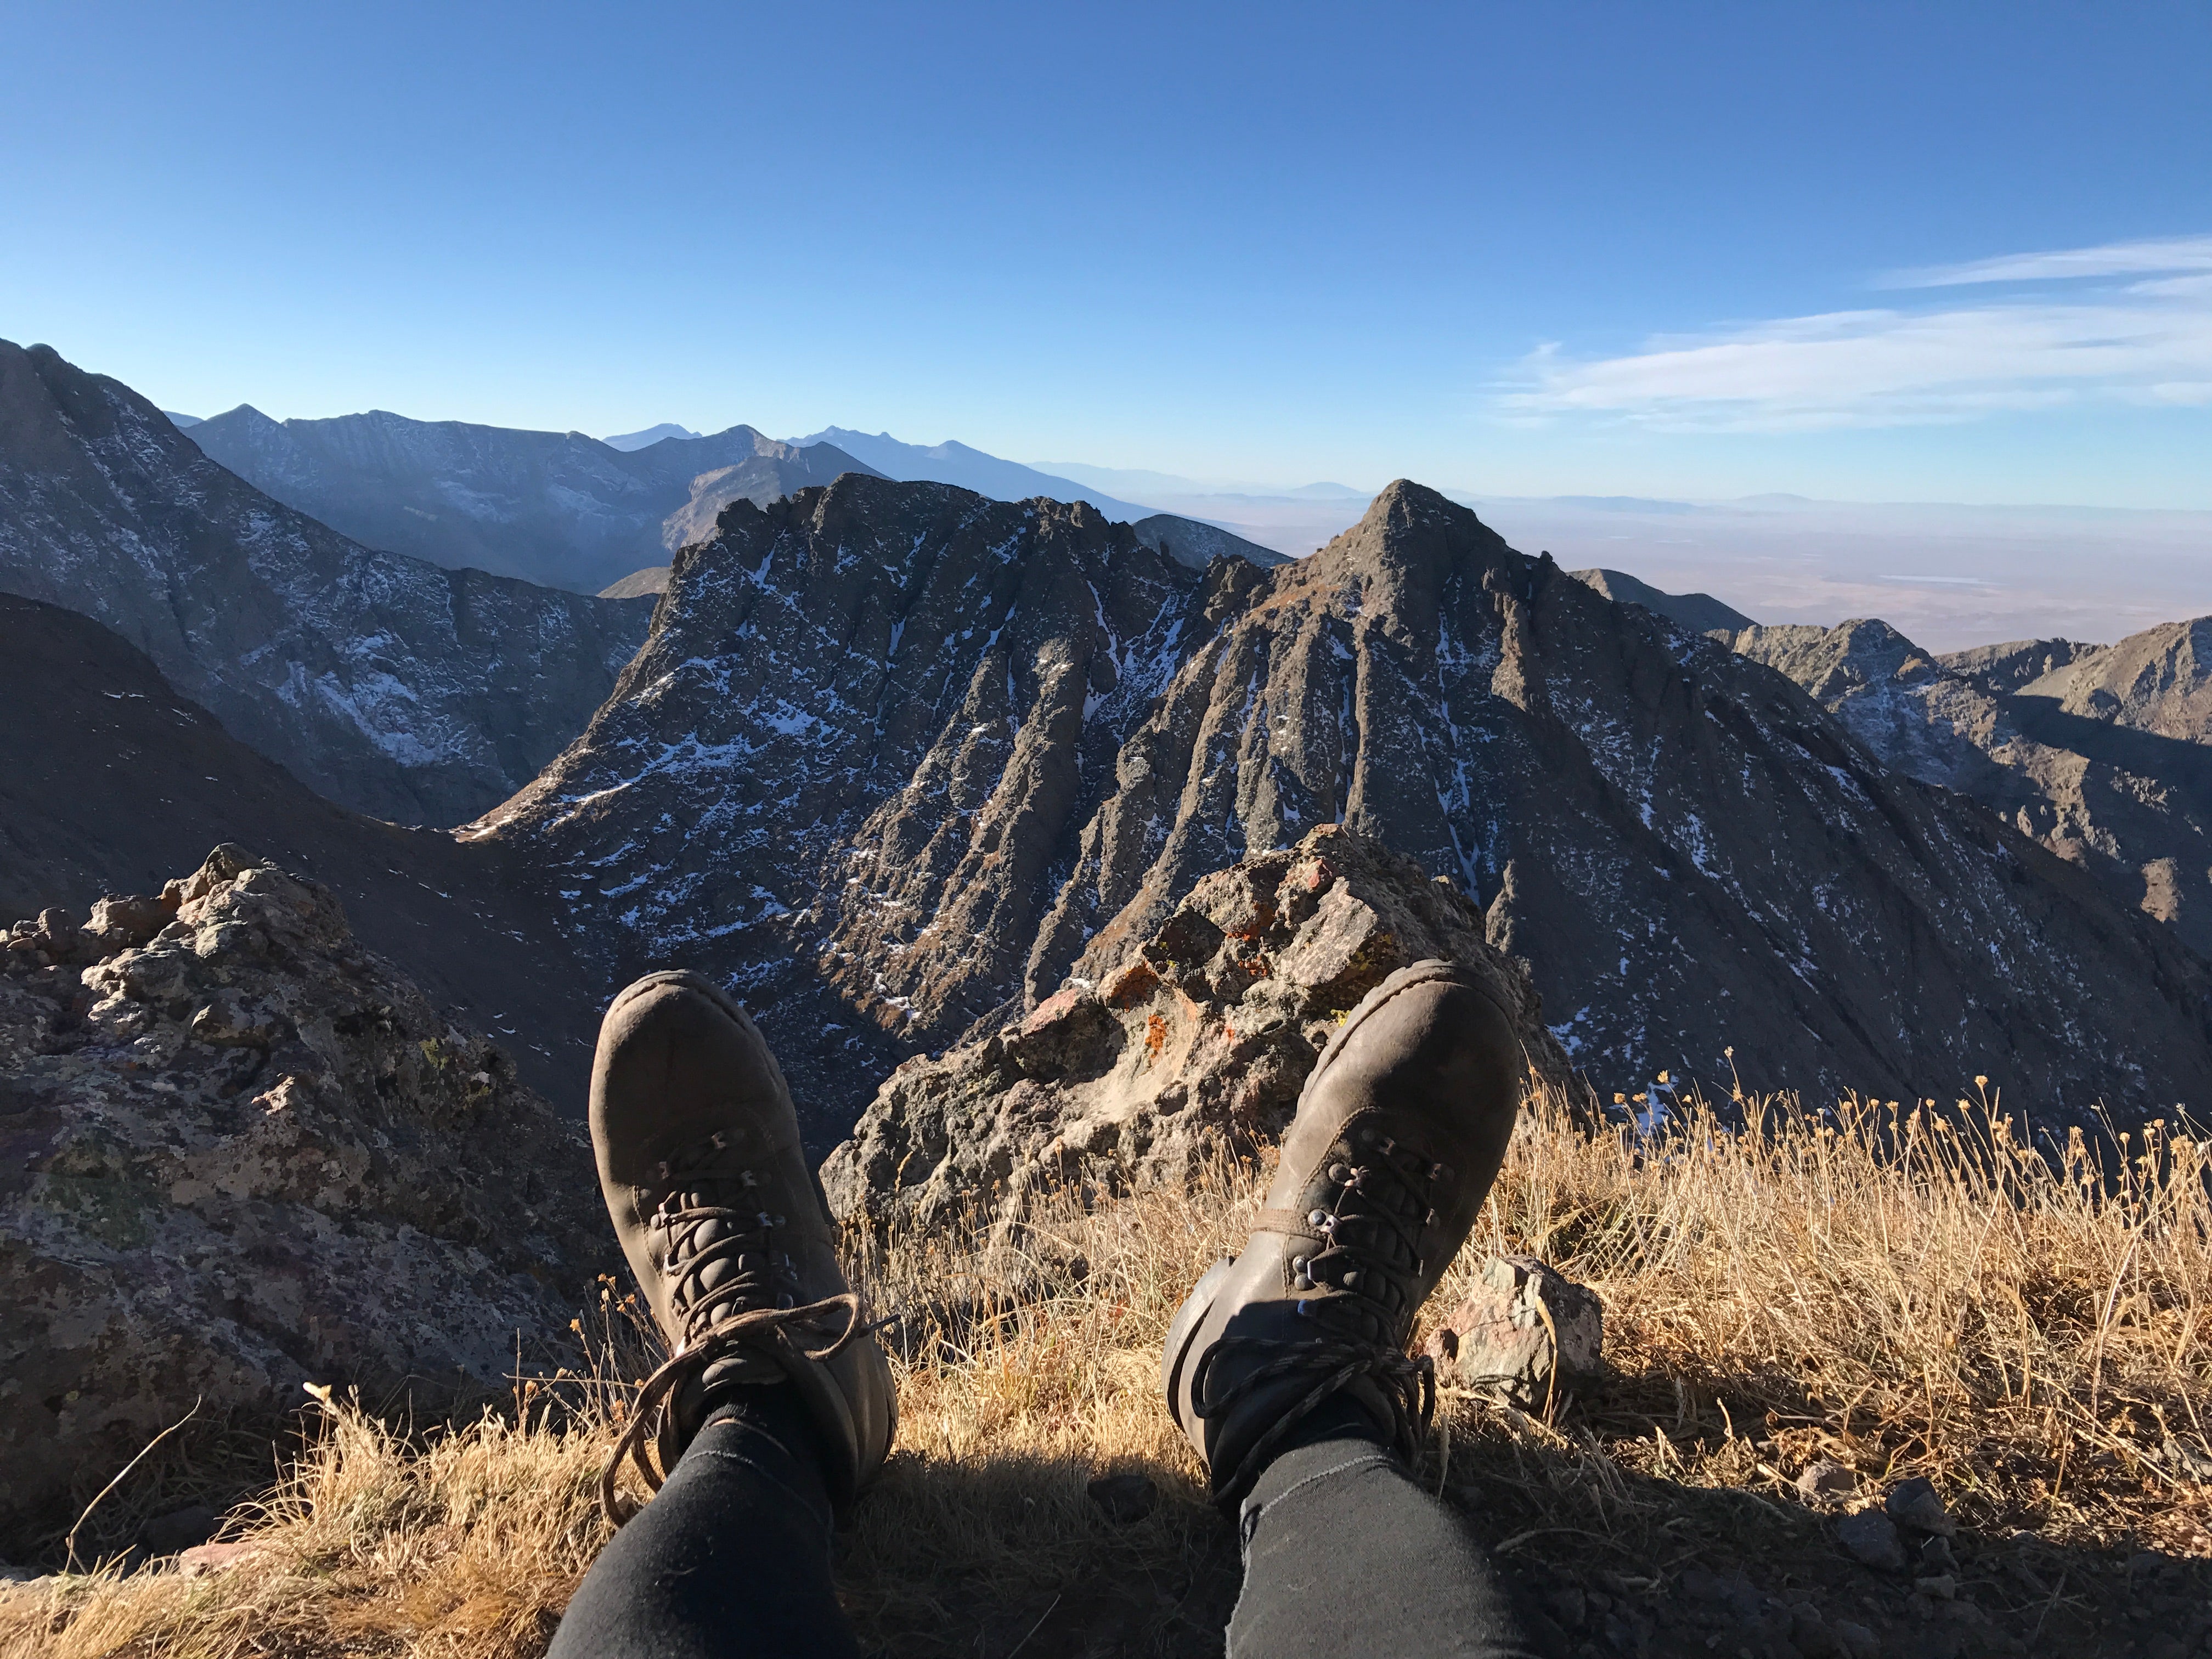 Limmer Boots on Crestone Needle Looking South